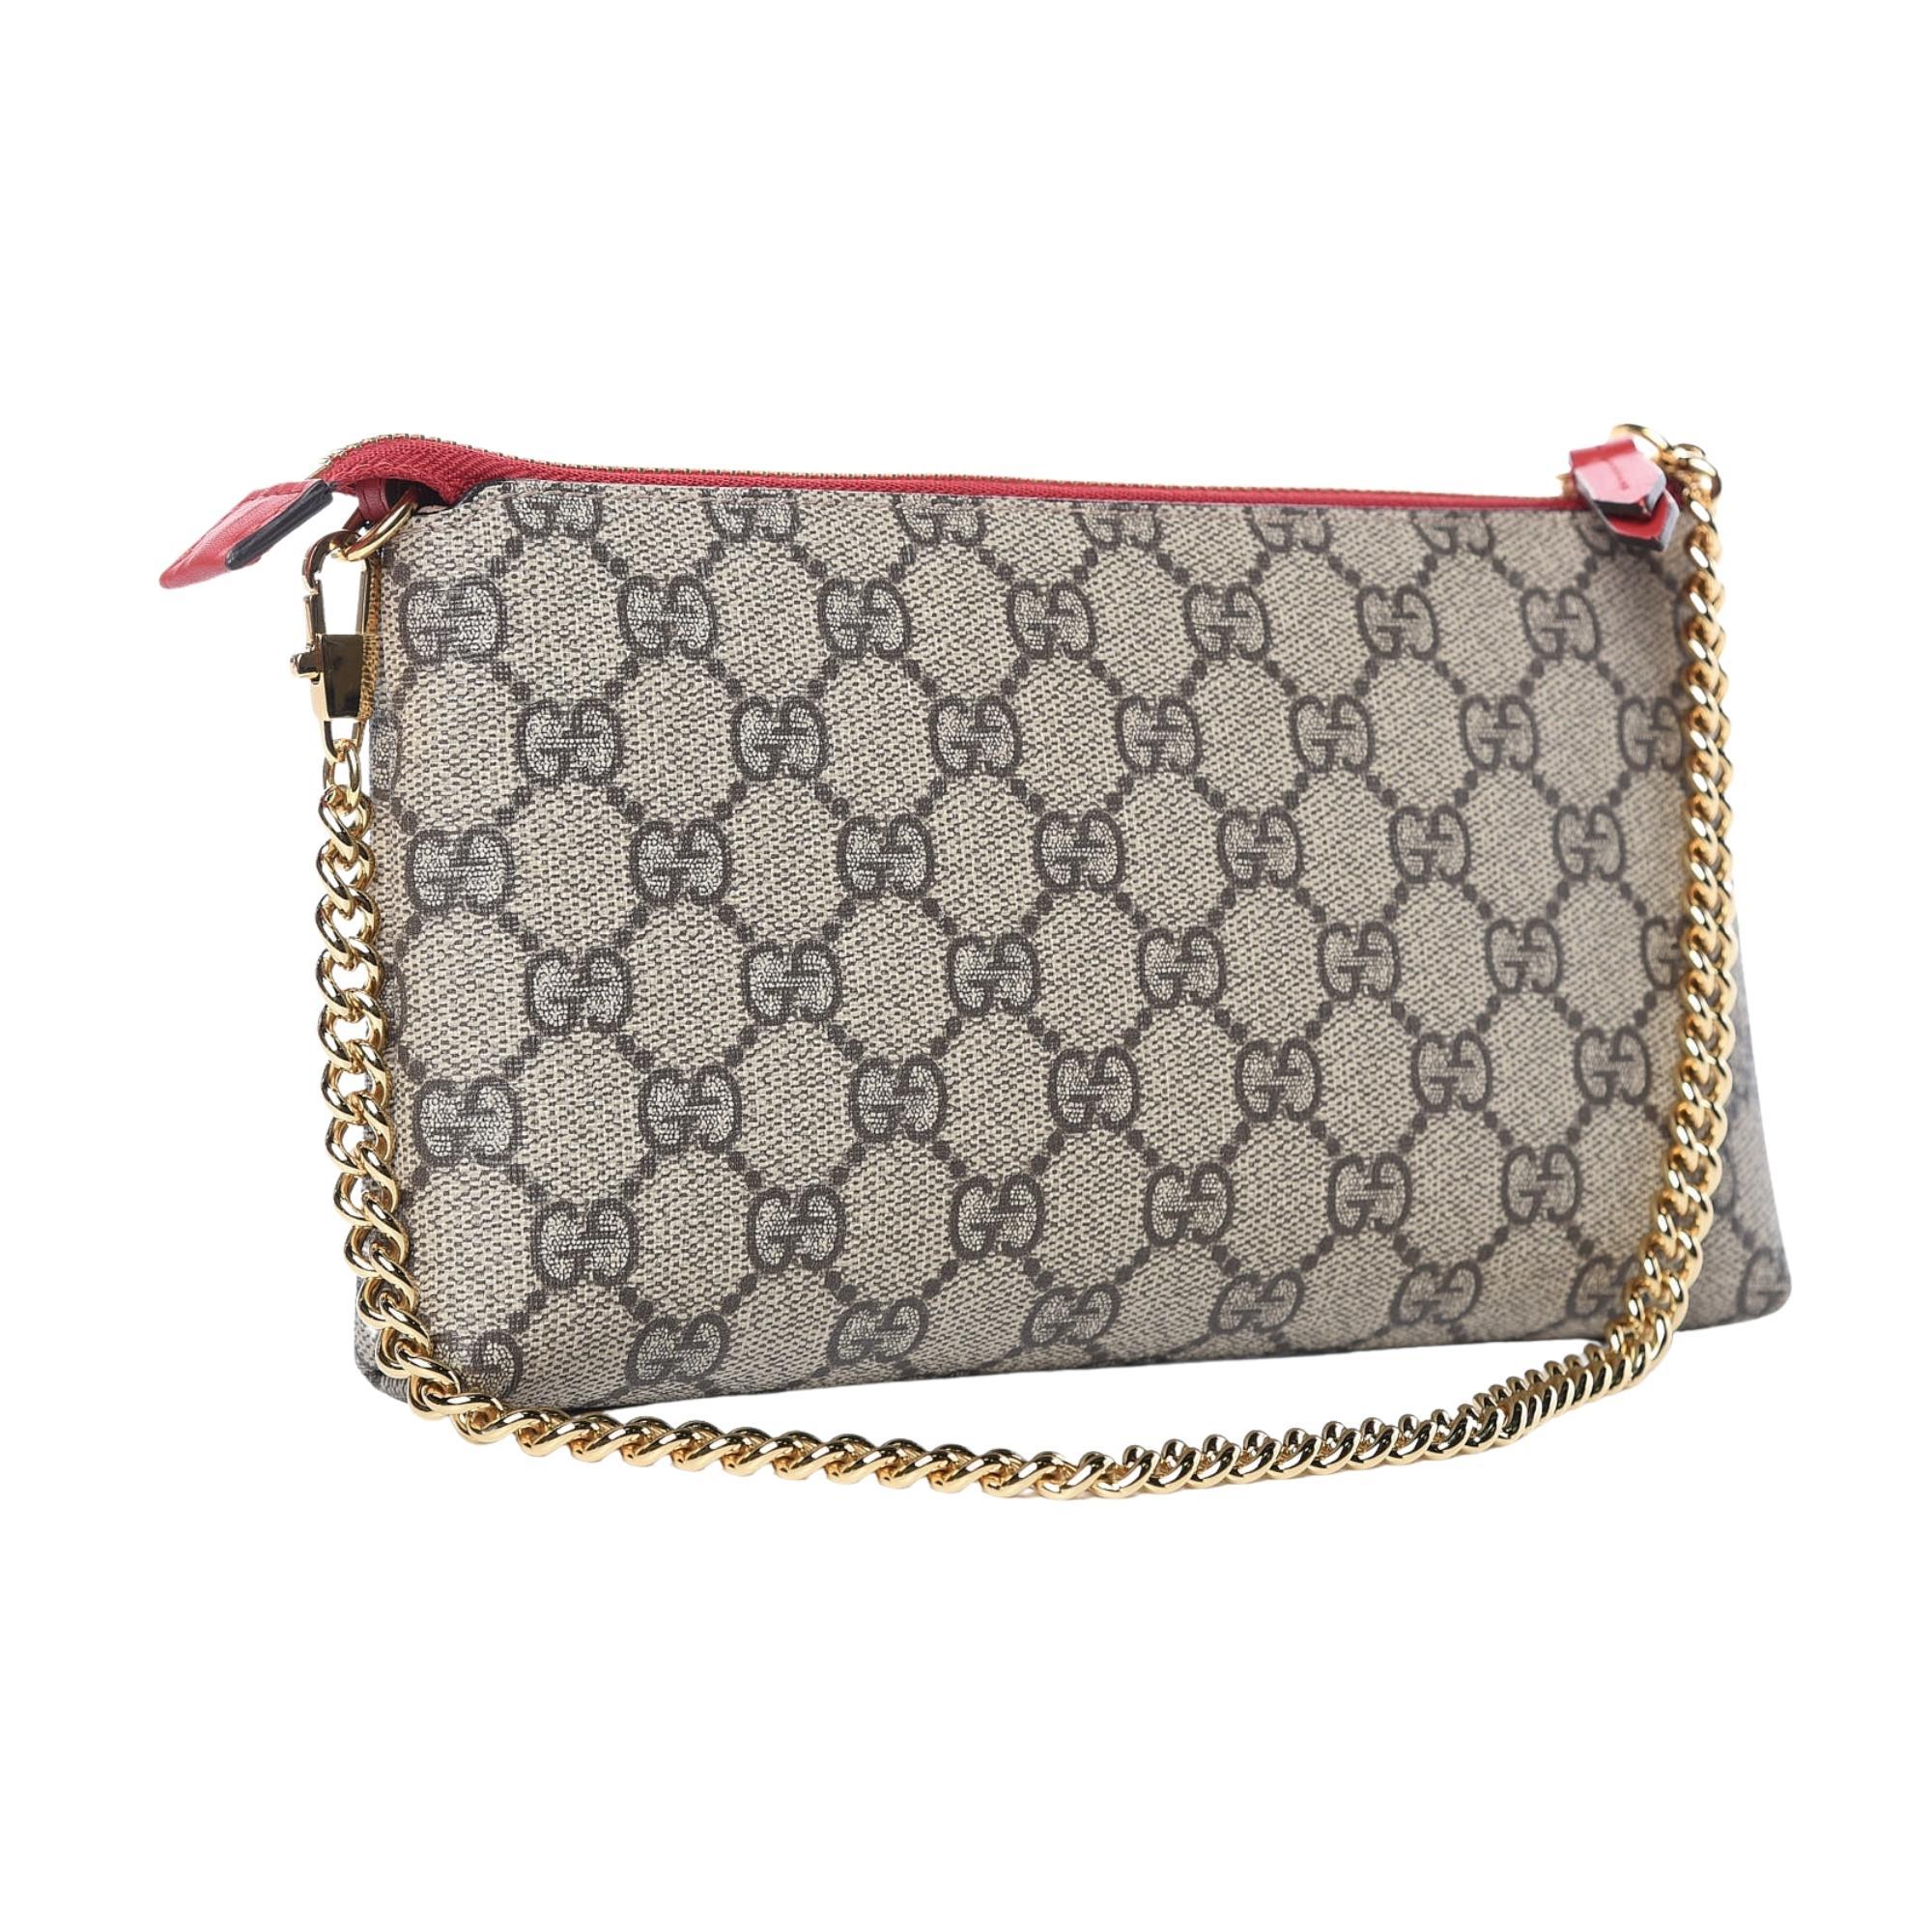 This chain wallet is crafted of GG monogram with heart/snake embroider patch. The bag features a gold shoulder chain and a zipper pull that opens to a beige microfiber interior with a spacious zippered currency compartment and card slots. Red